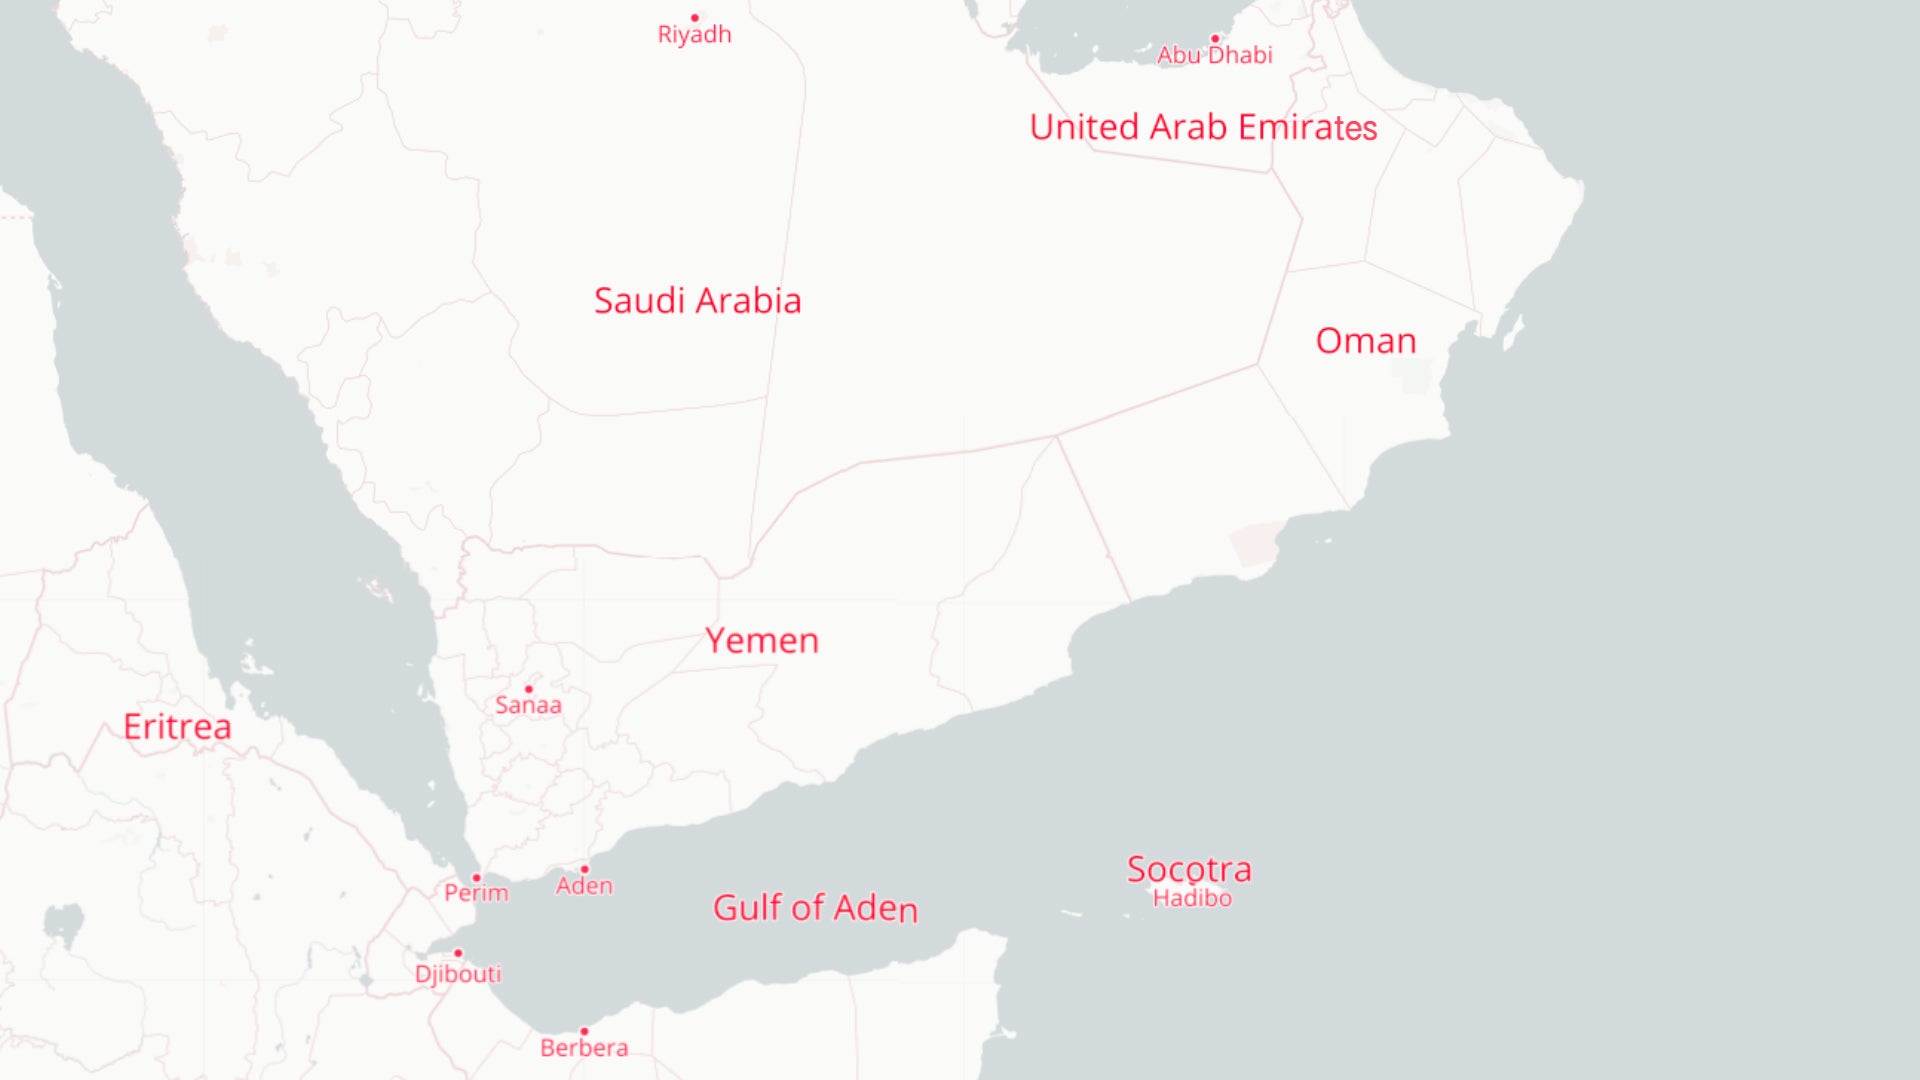 Socotra combines both the UAE’s military and economic interests